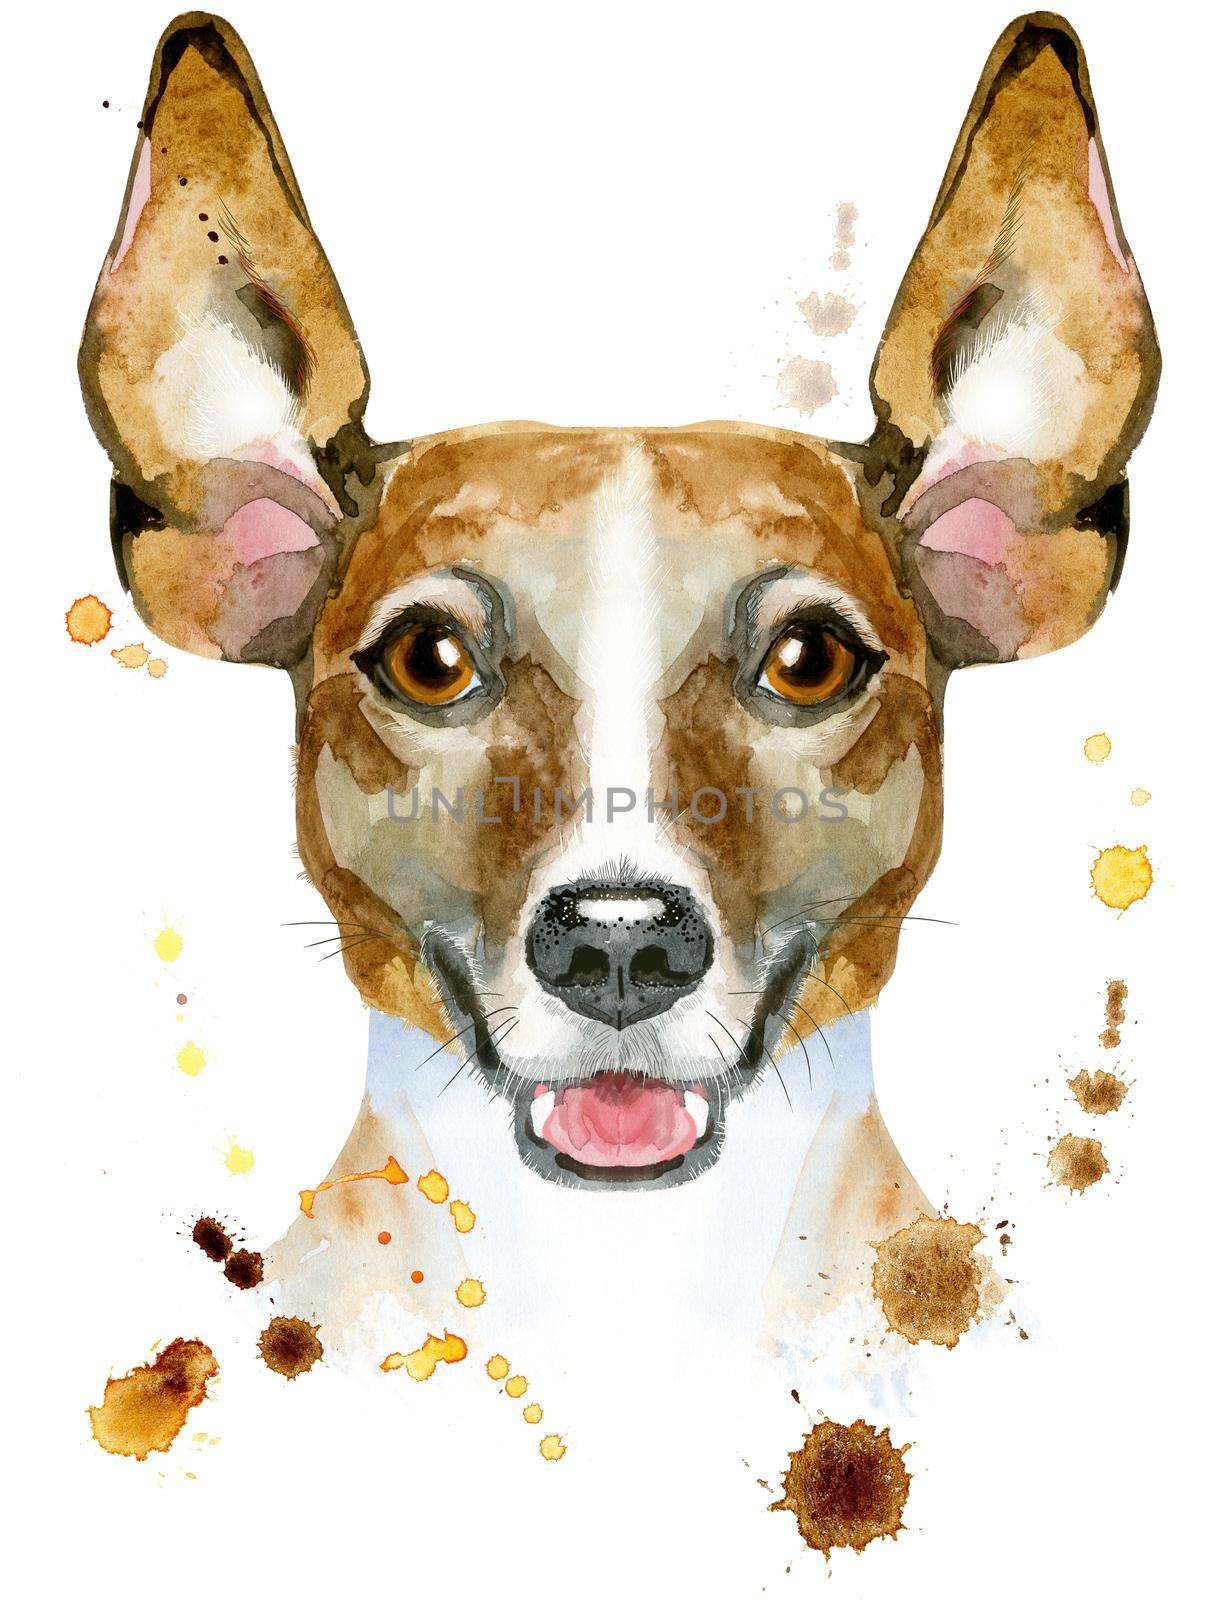 Cute Dog. Dog T-shirt graphics. watercolor jack russell terrier illustration